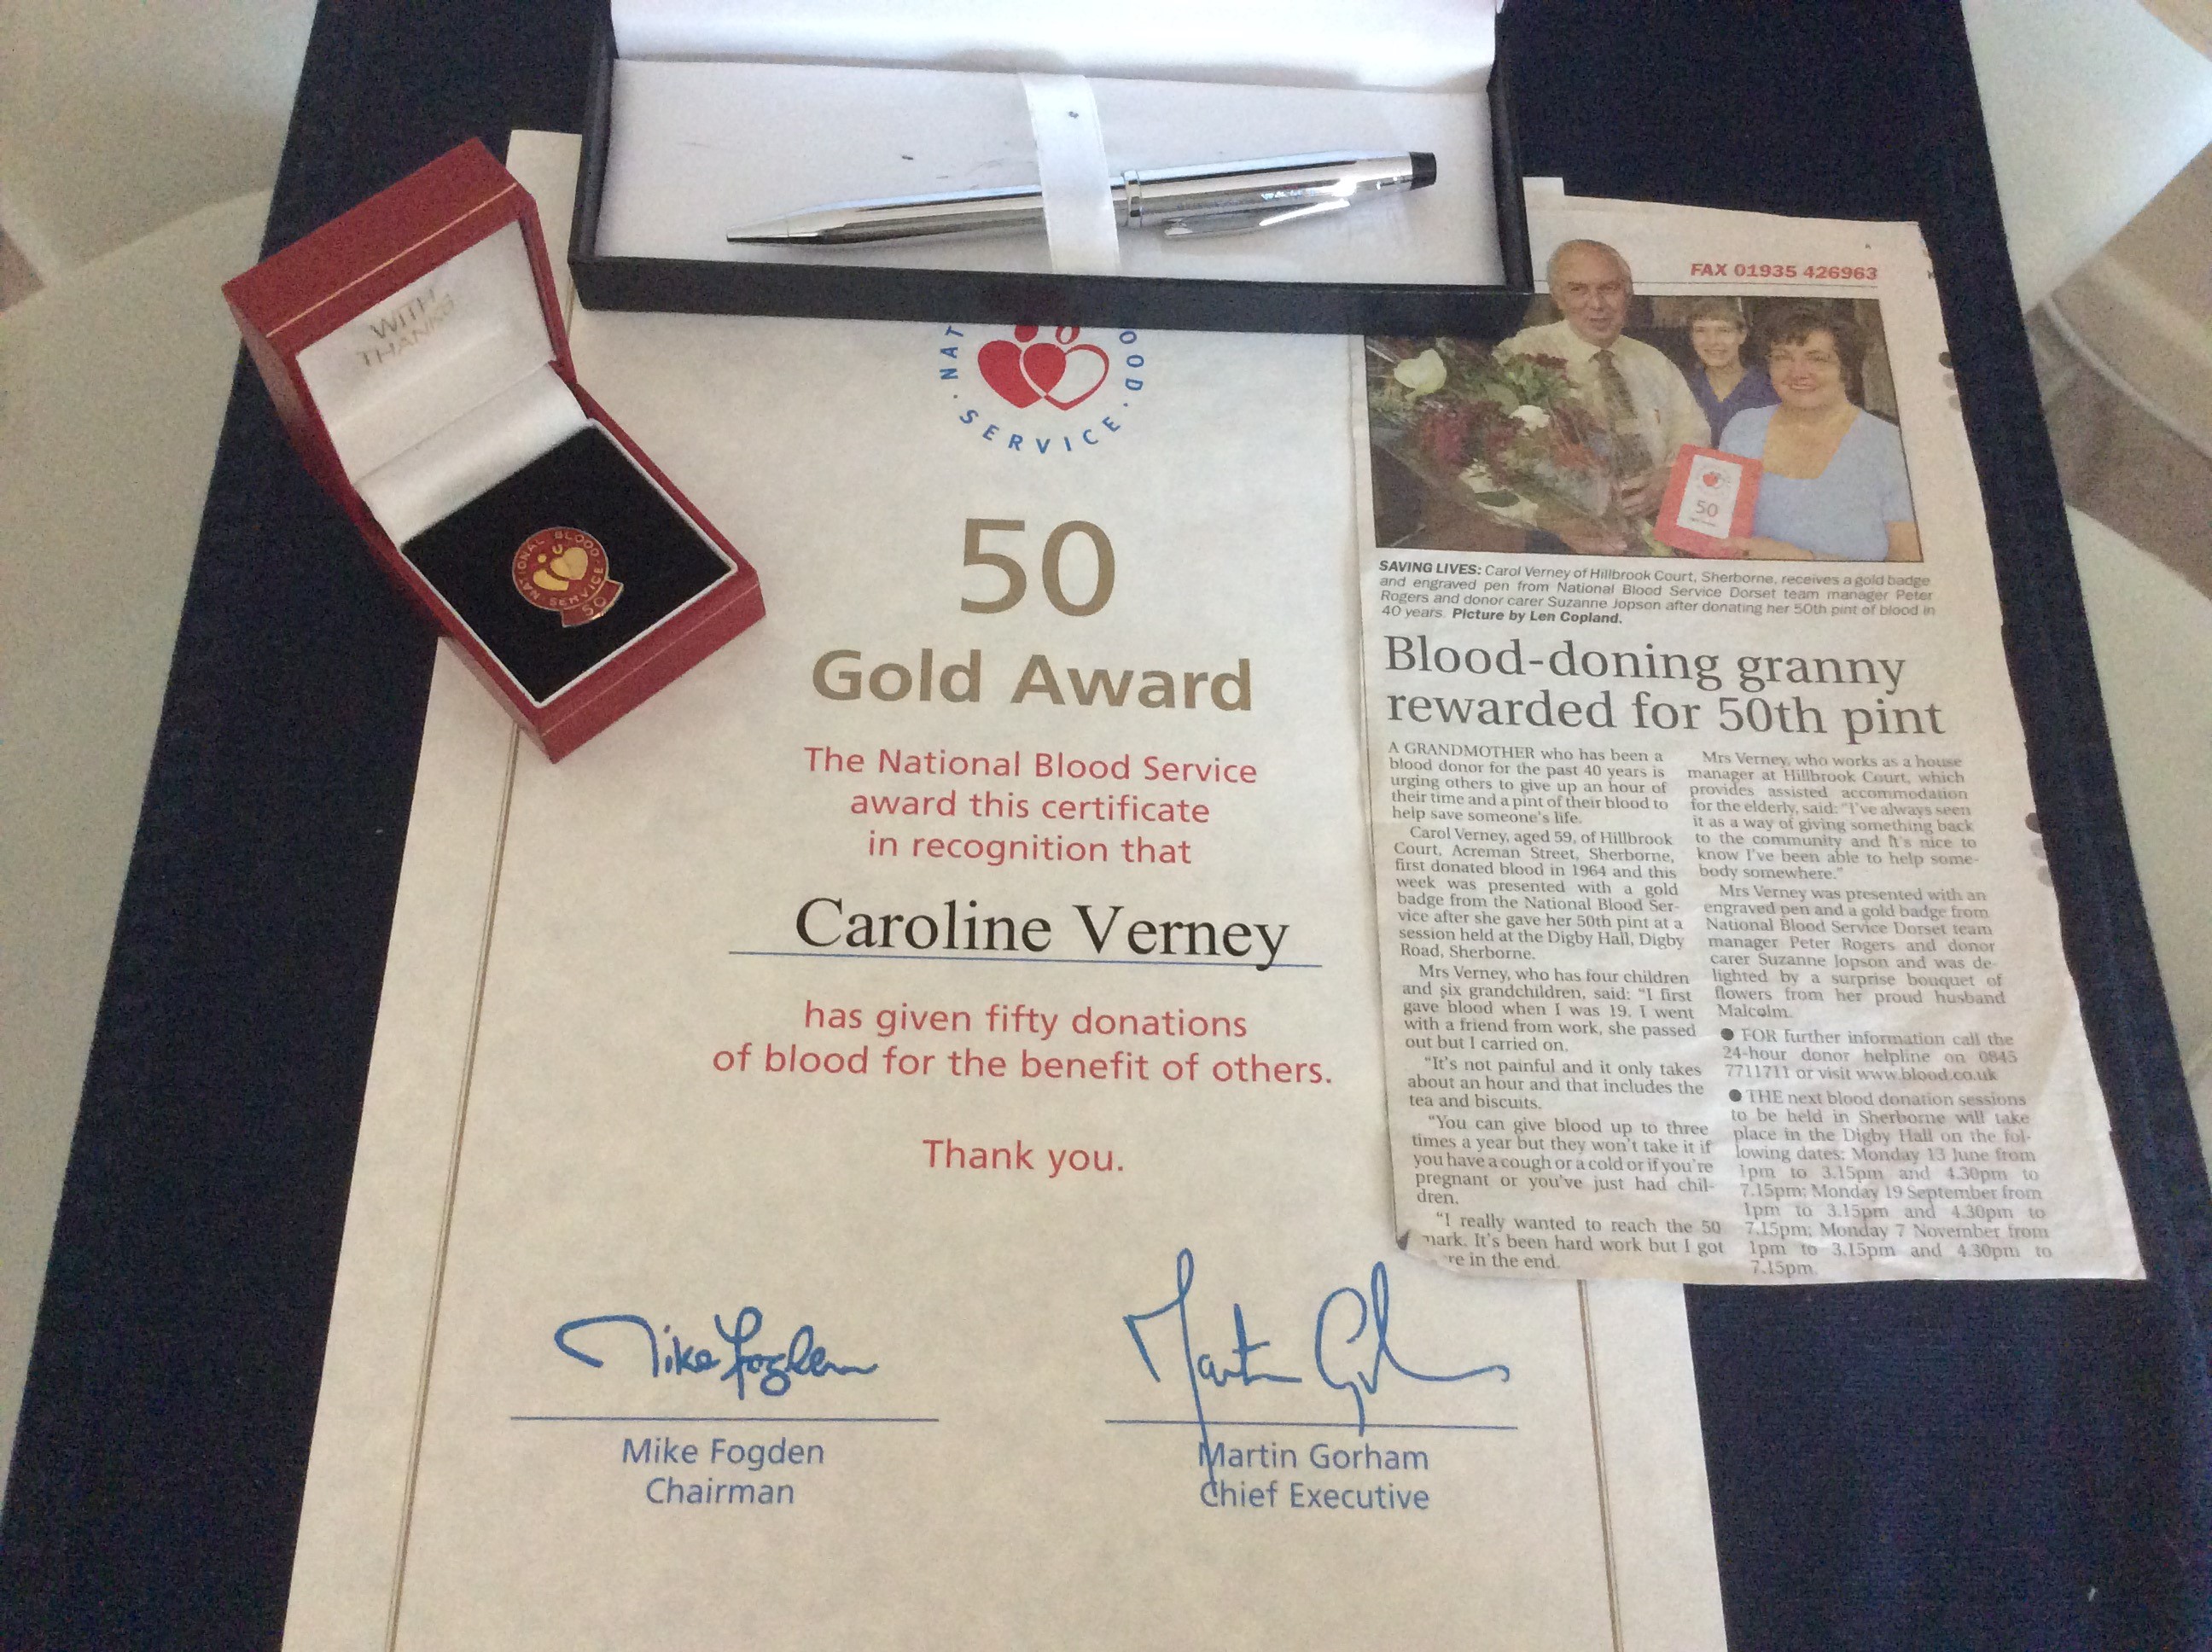 Carol's 50th donation certificate, badge and newspaper article